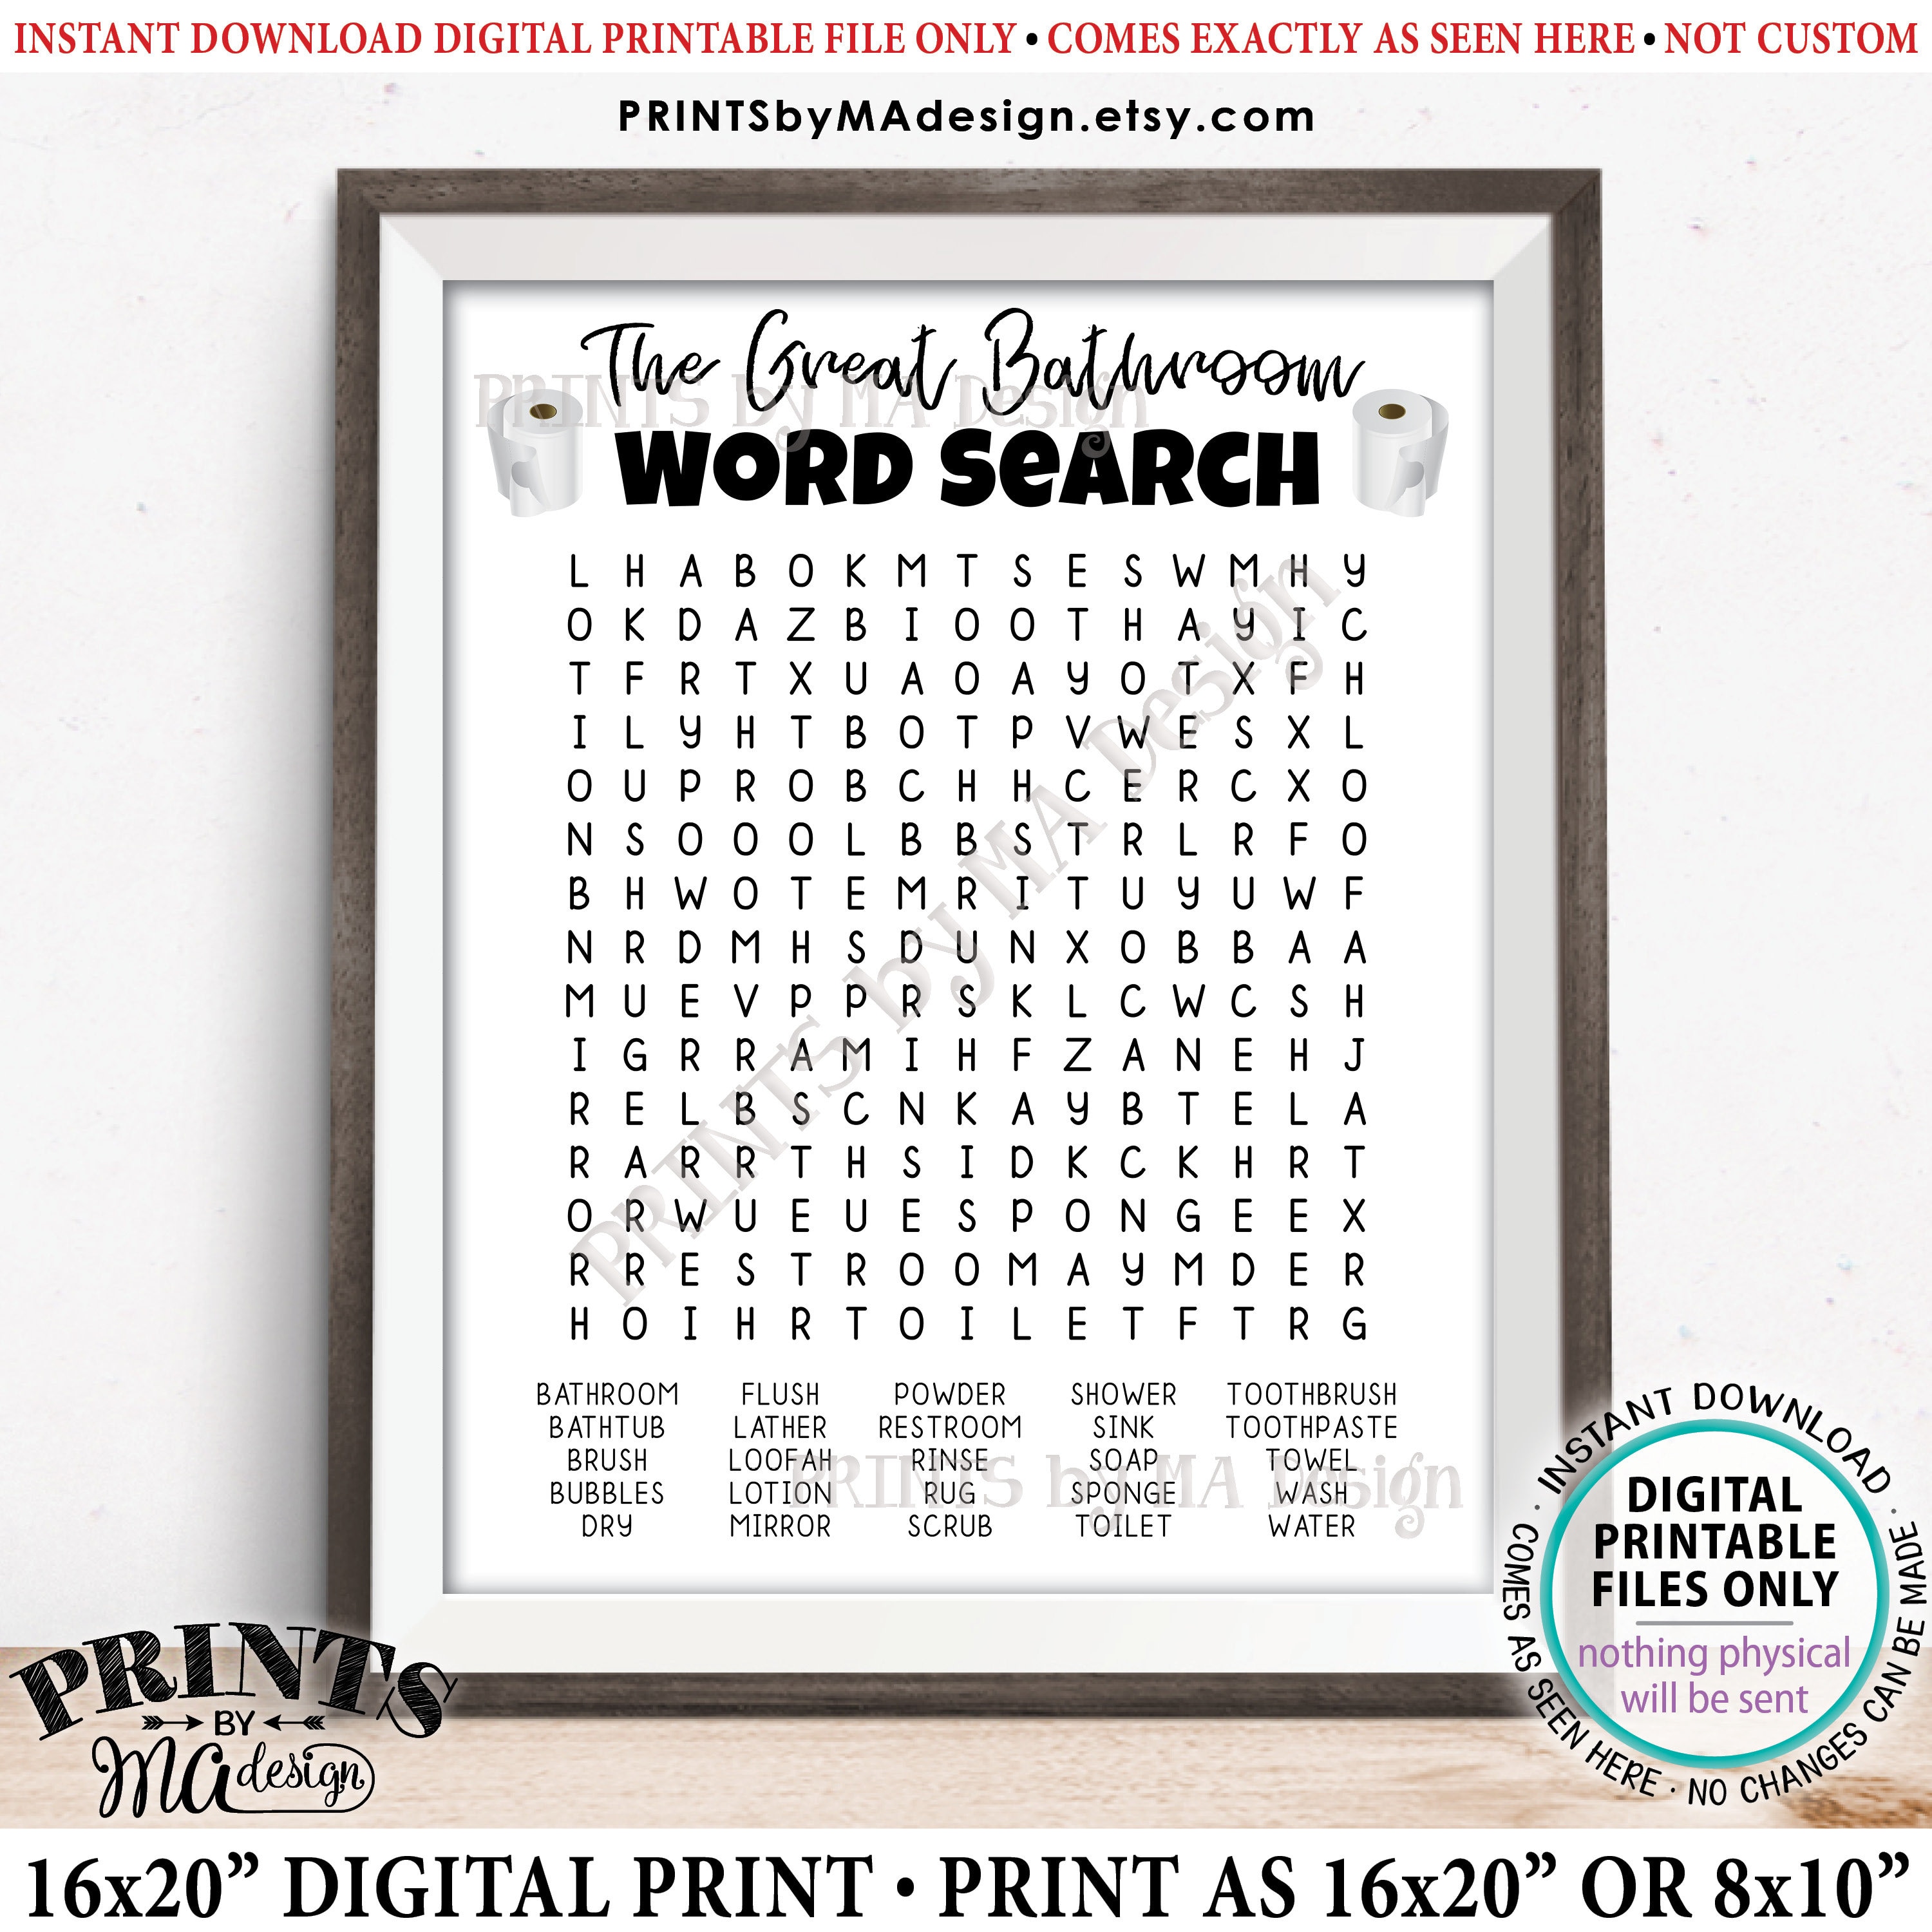 the-great-bathroom-word-search-silly-housewarming-gift-fun-bathroom-puzzle-toilet-paper